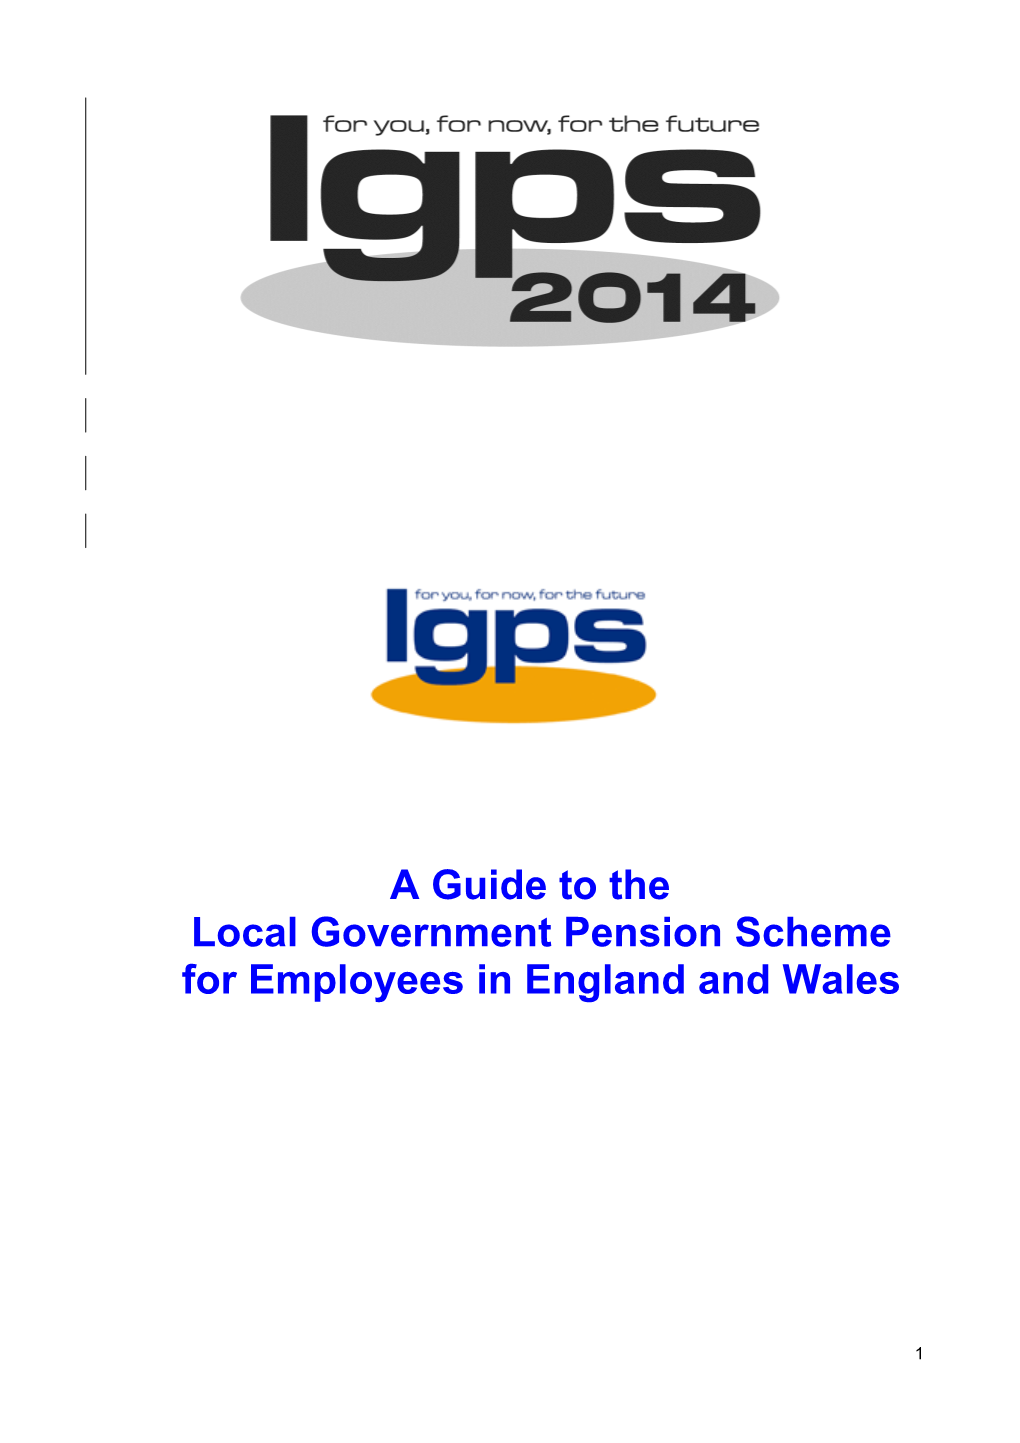 A Guide to the Local Government Pension Scheme for Employees in England and Wales - 1 April 2008